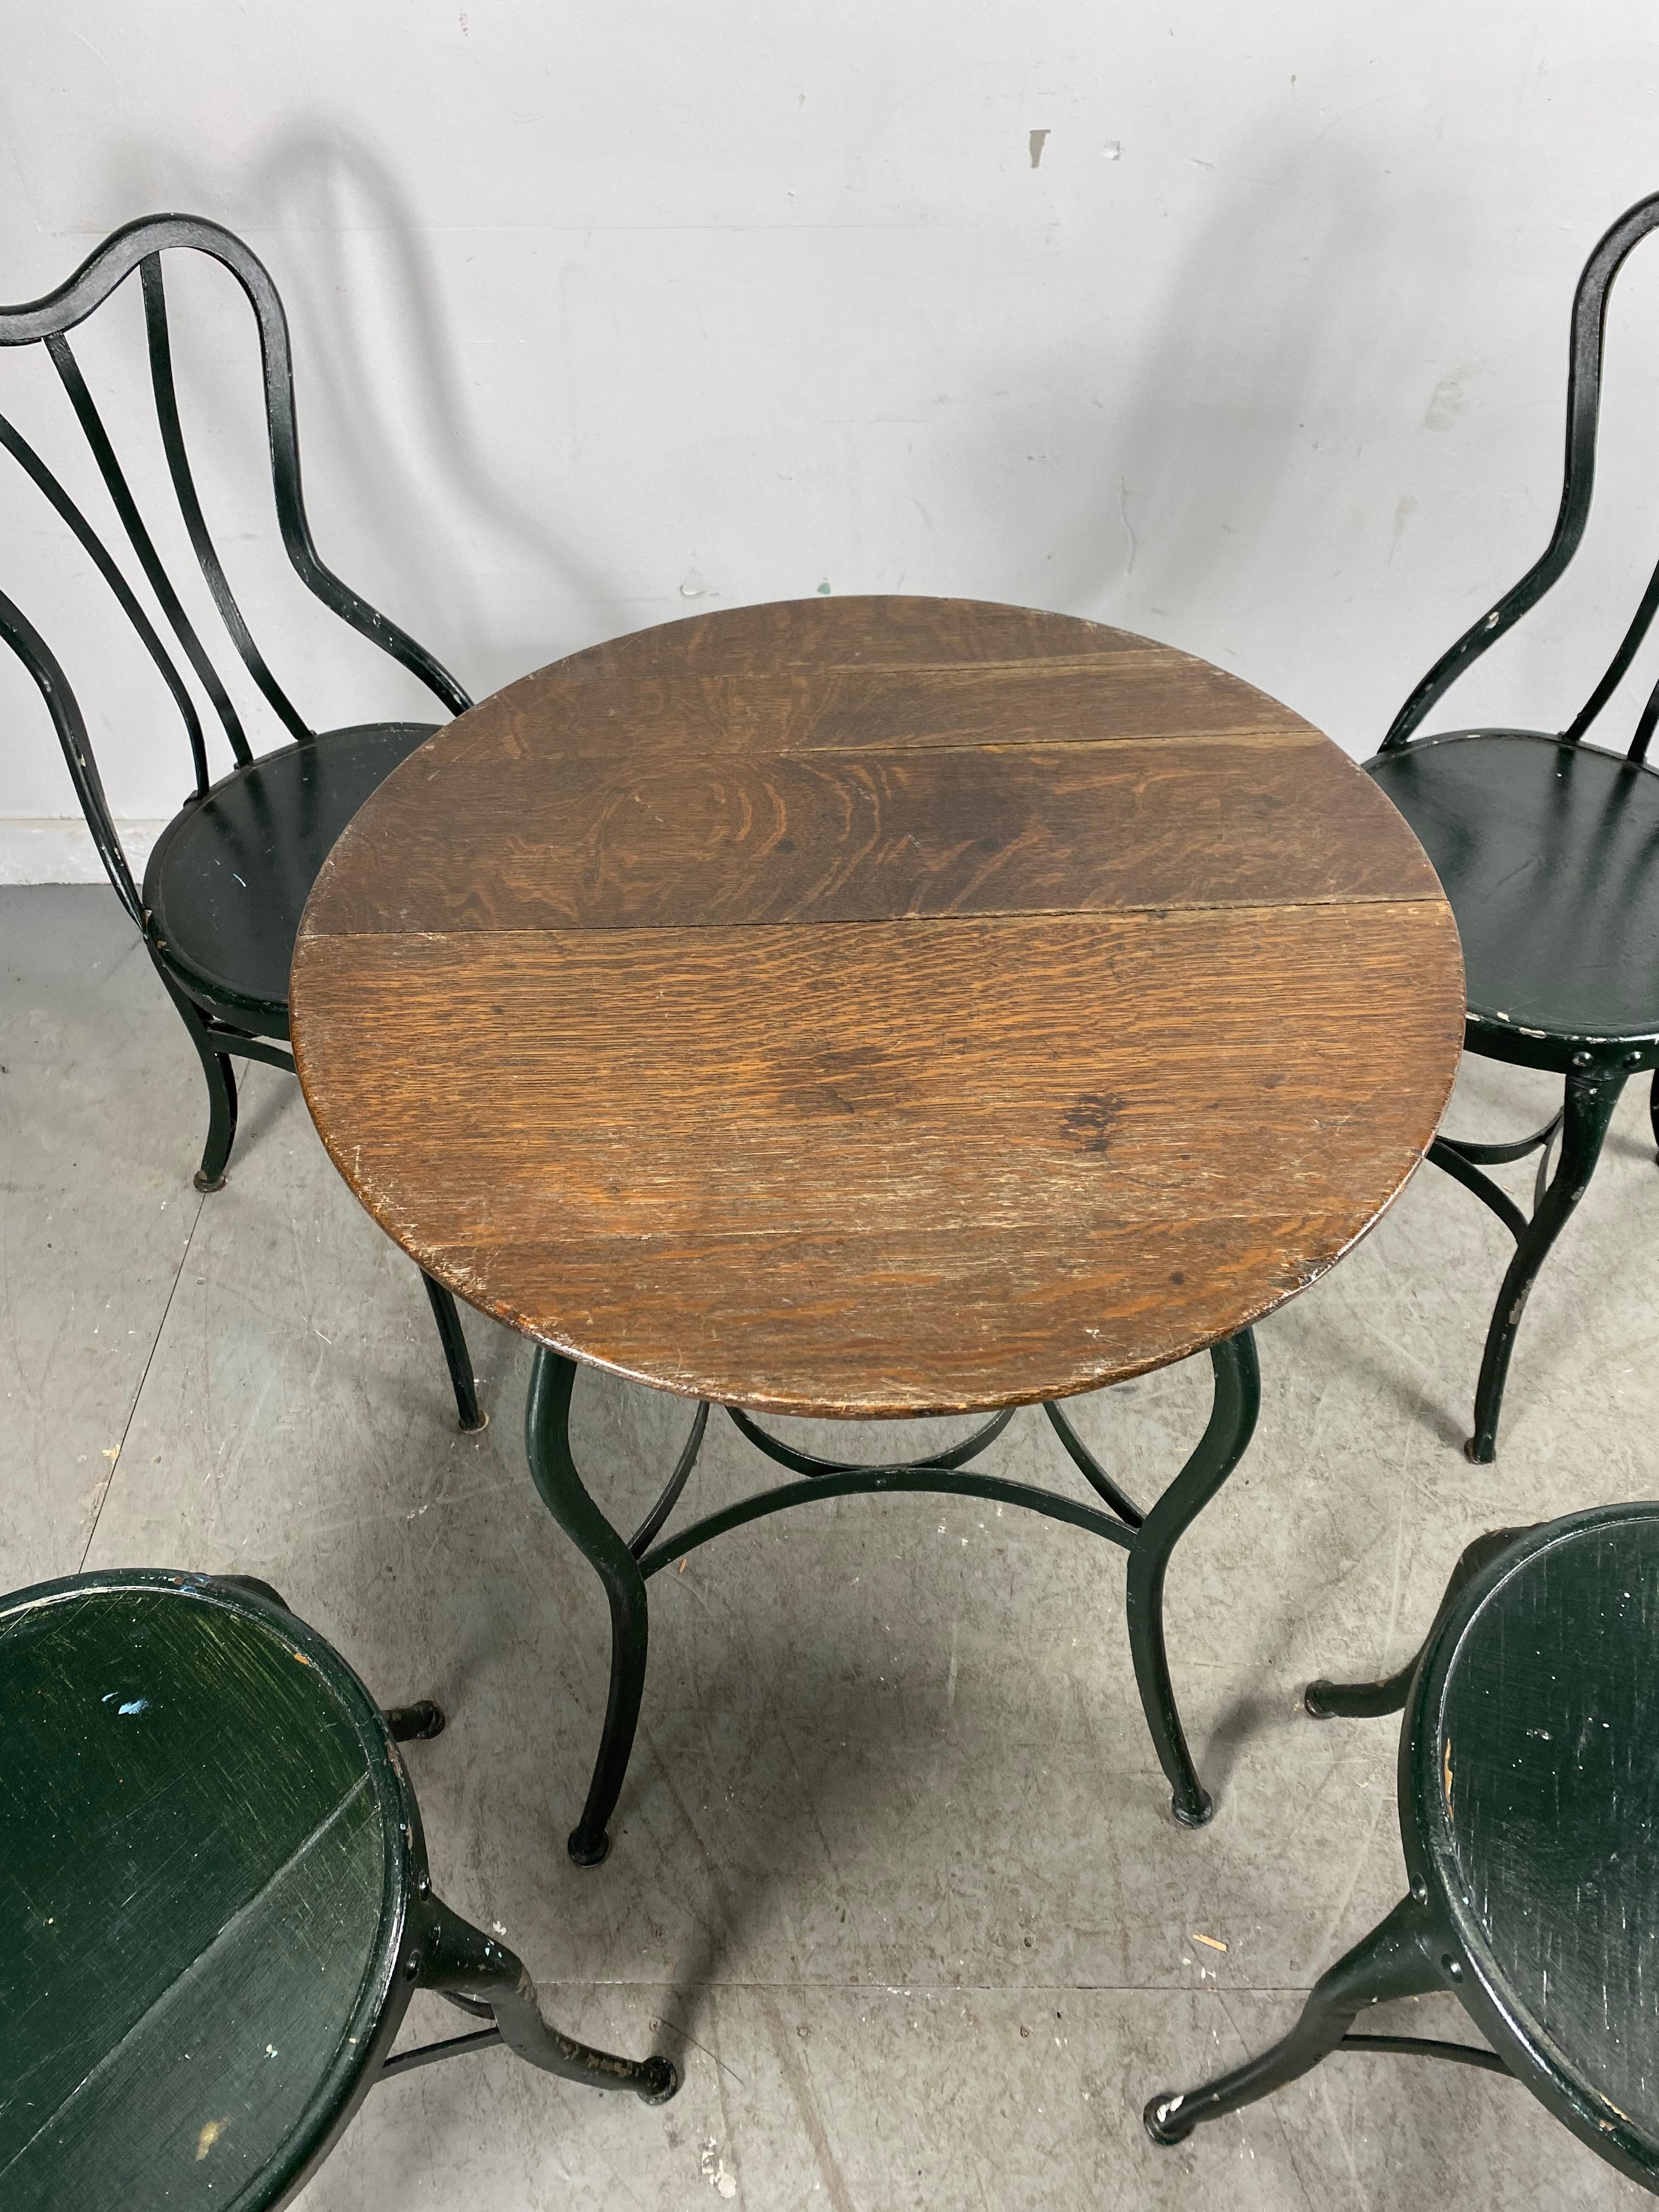 USA, 1910, vintage clement Uhl Designed art steel cafe chairs and seldom seen table manufactured by Toledo Metal Furniture Company, great little industrial set, almost Art Nouveau in design, Old paint, color. Surface. Chairs retain early 3-ply